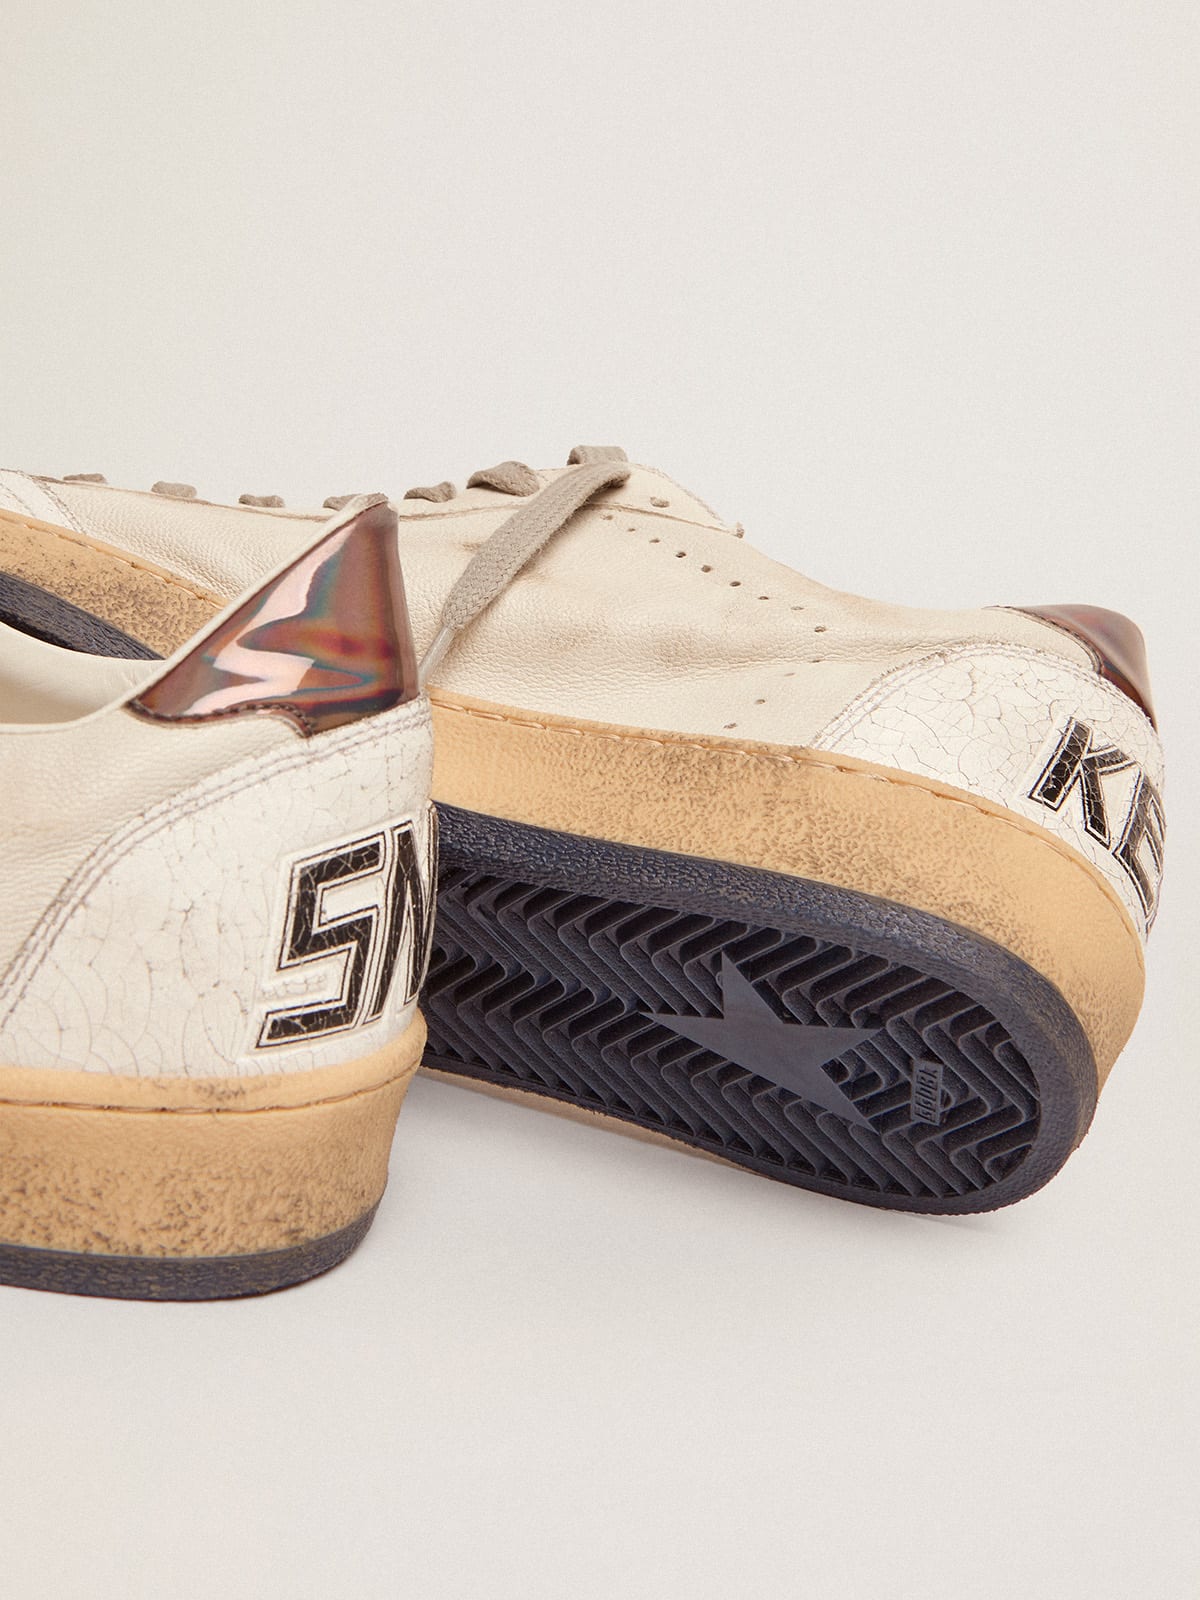 Golden Goose - Ball Star sneakers in nappa leather with holographic inserts and lettering on the sole in 